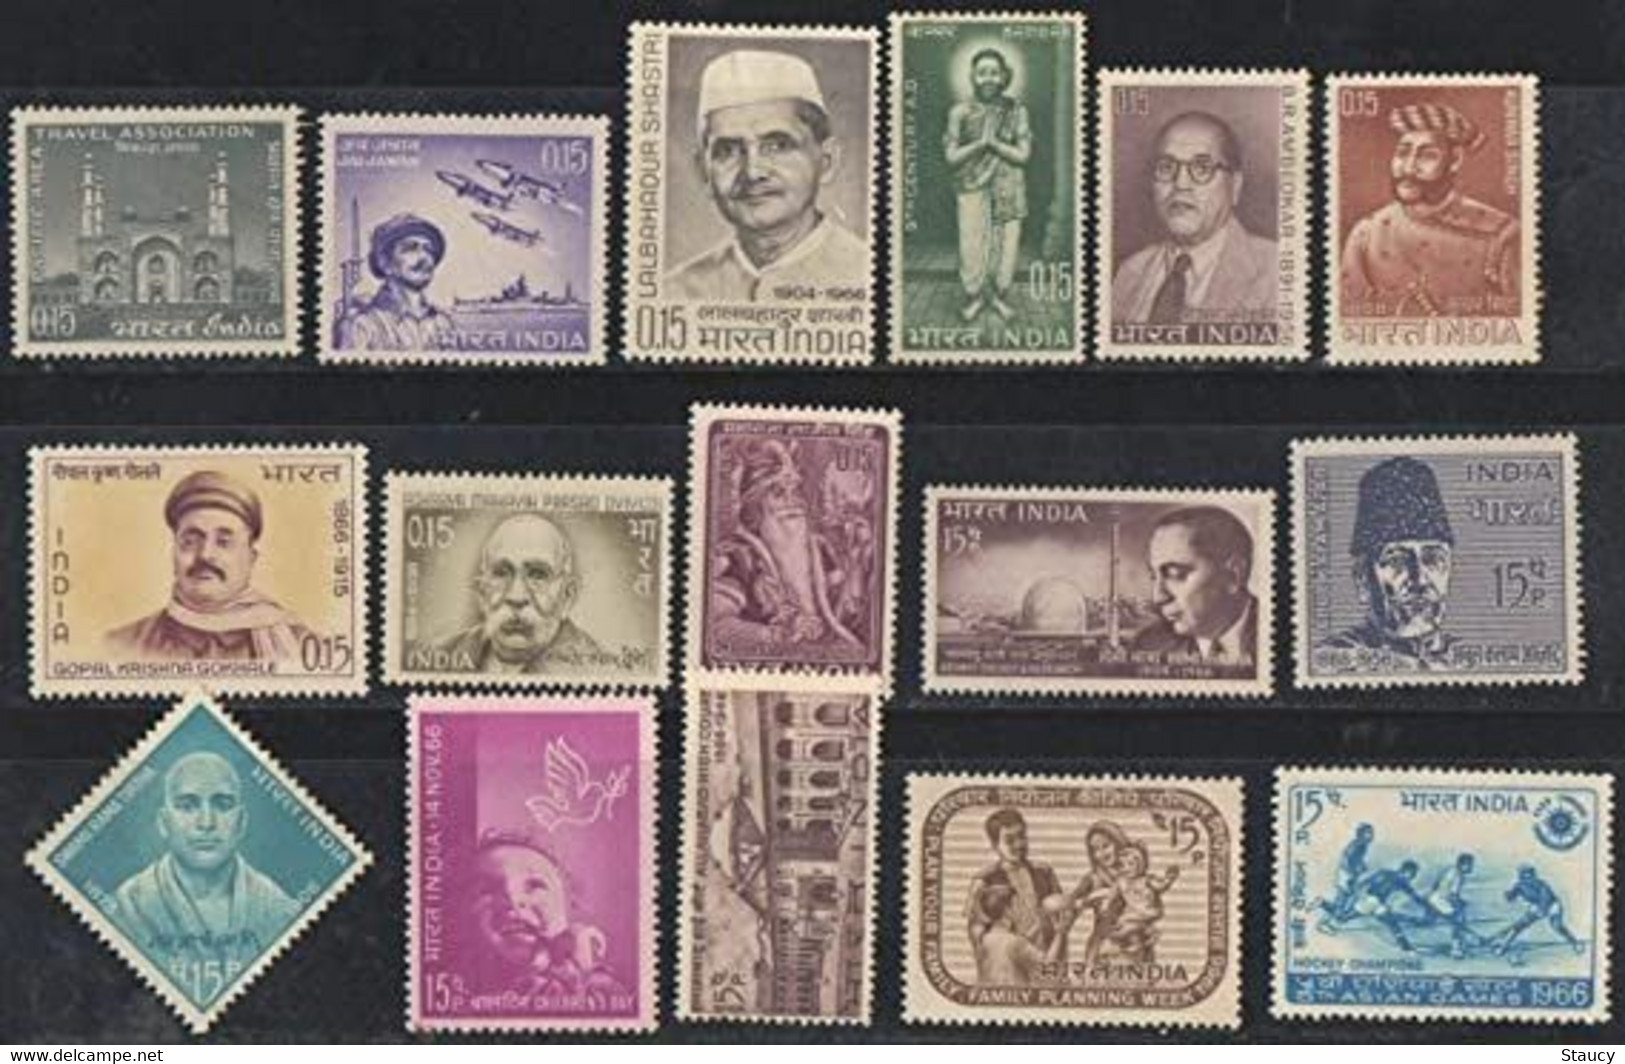 India 1966 Complete Year Pack / Set / Collection Total 16 Stamps (No Missing) MNH As Per Scan - Années Complètes